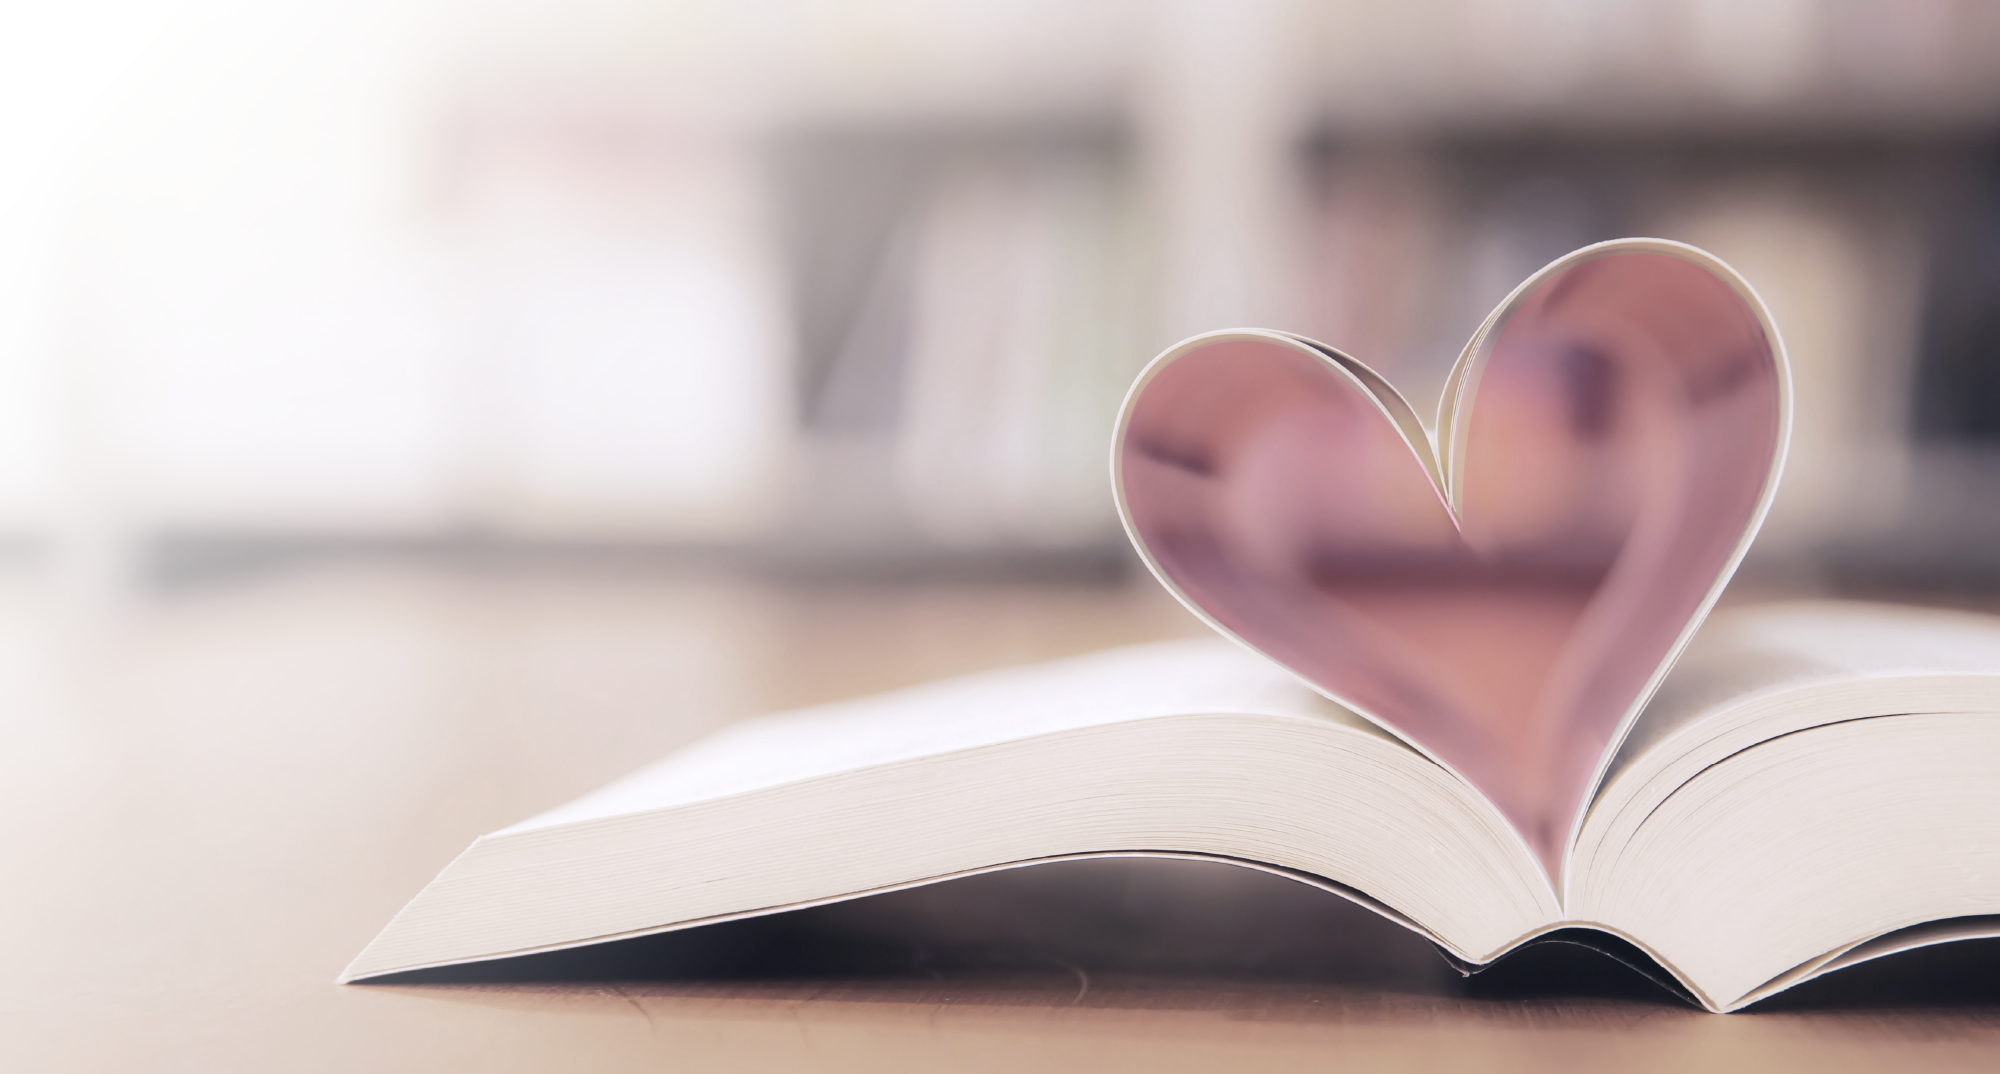 Book with pages in shape of a heart